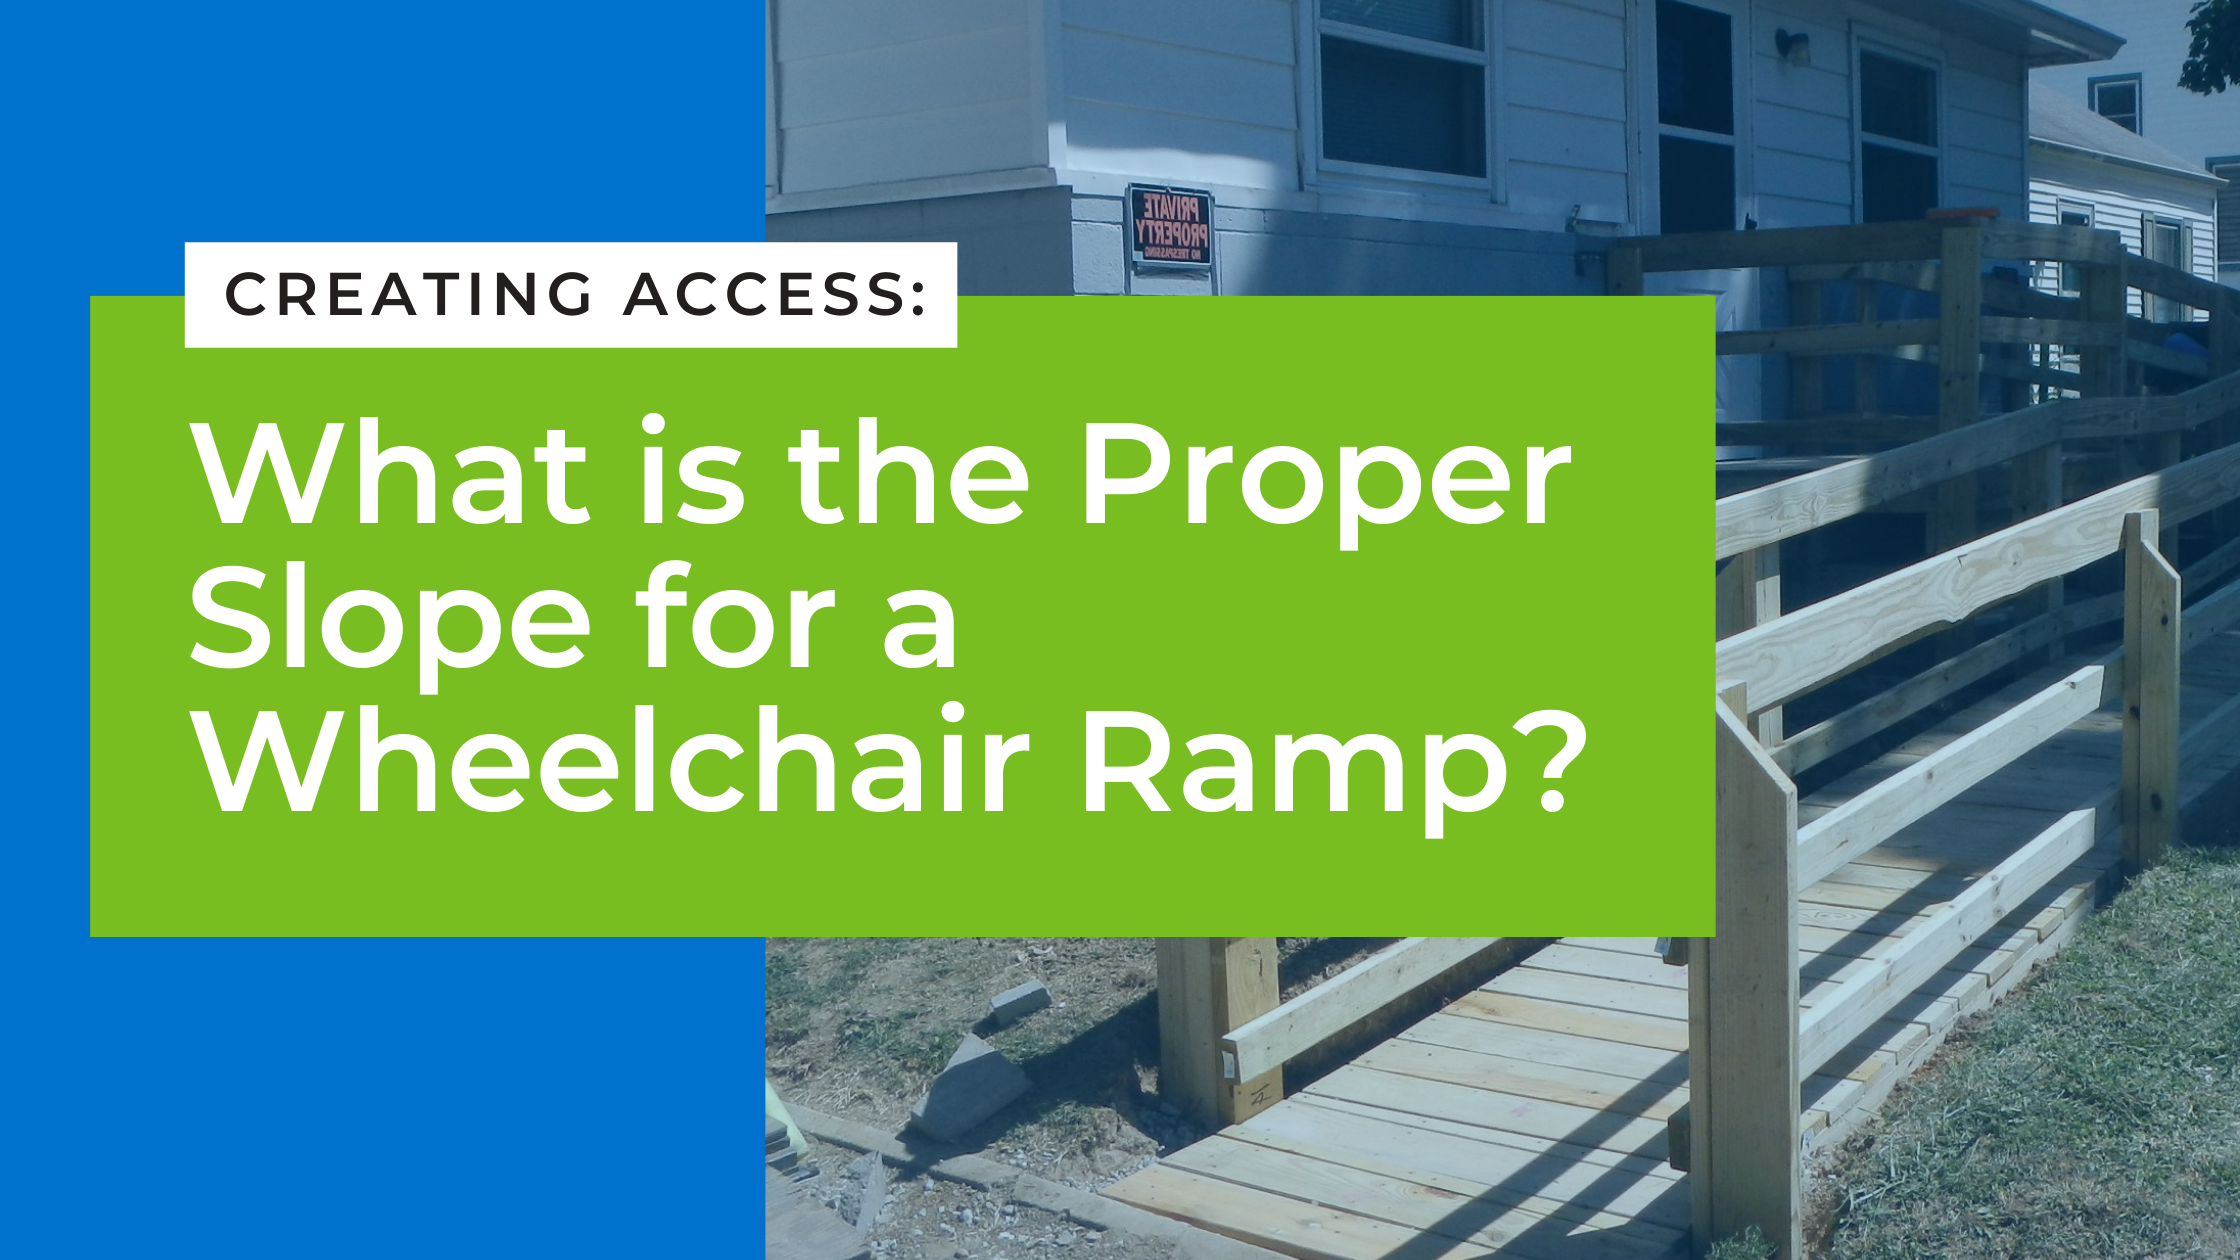 How to find the proper slope for a wheelchair ramp